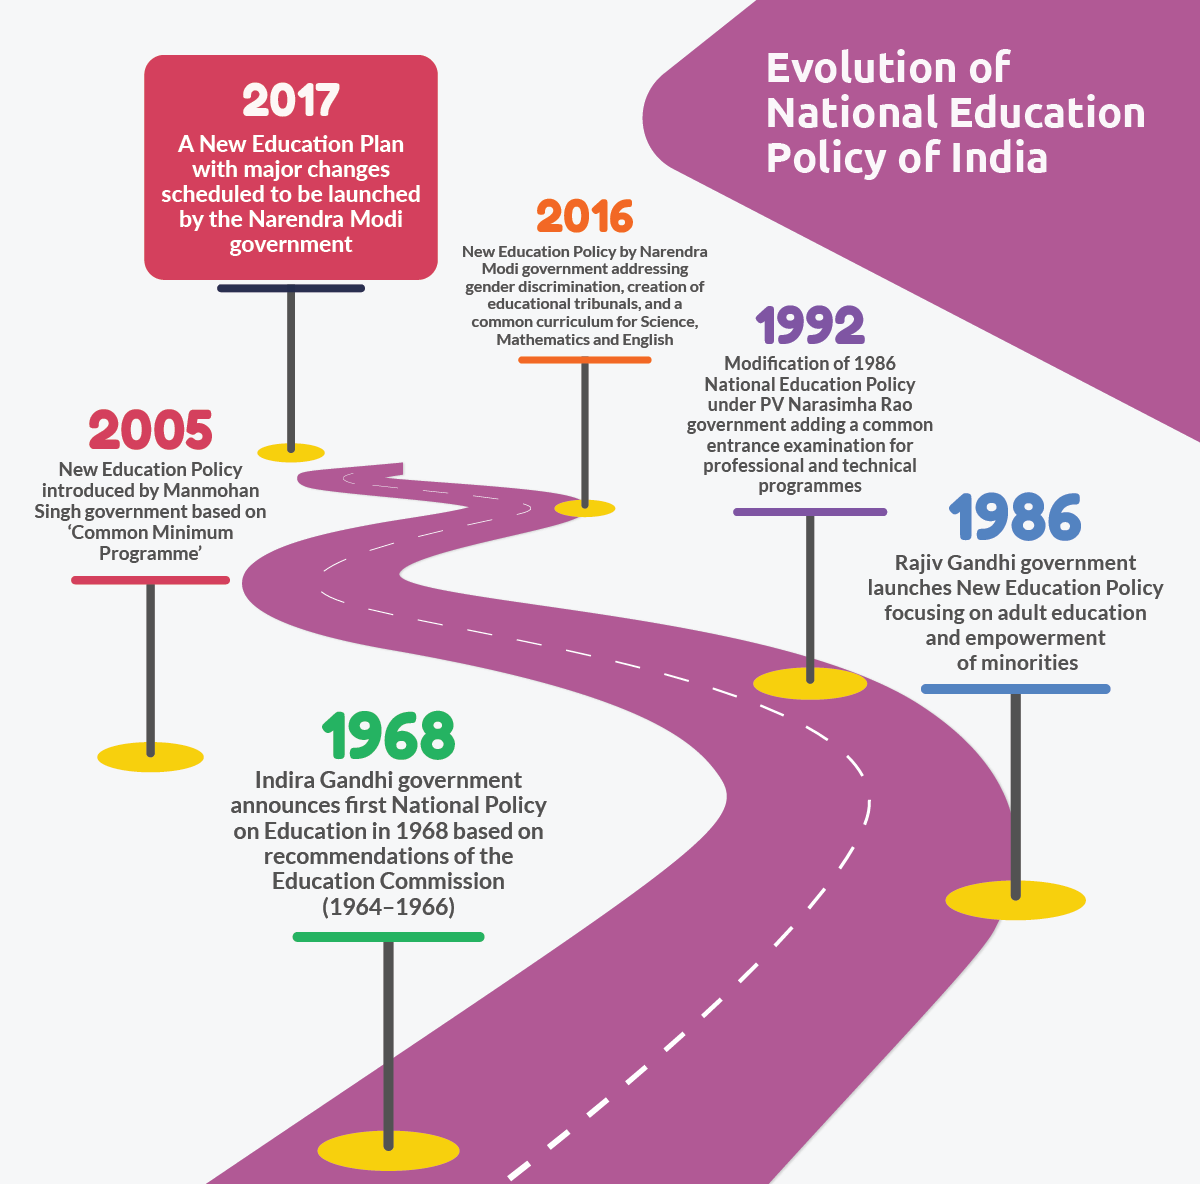 Evolution of National Education Policy in India